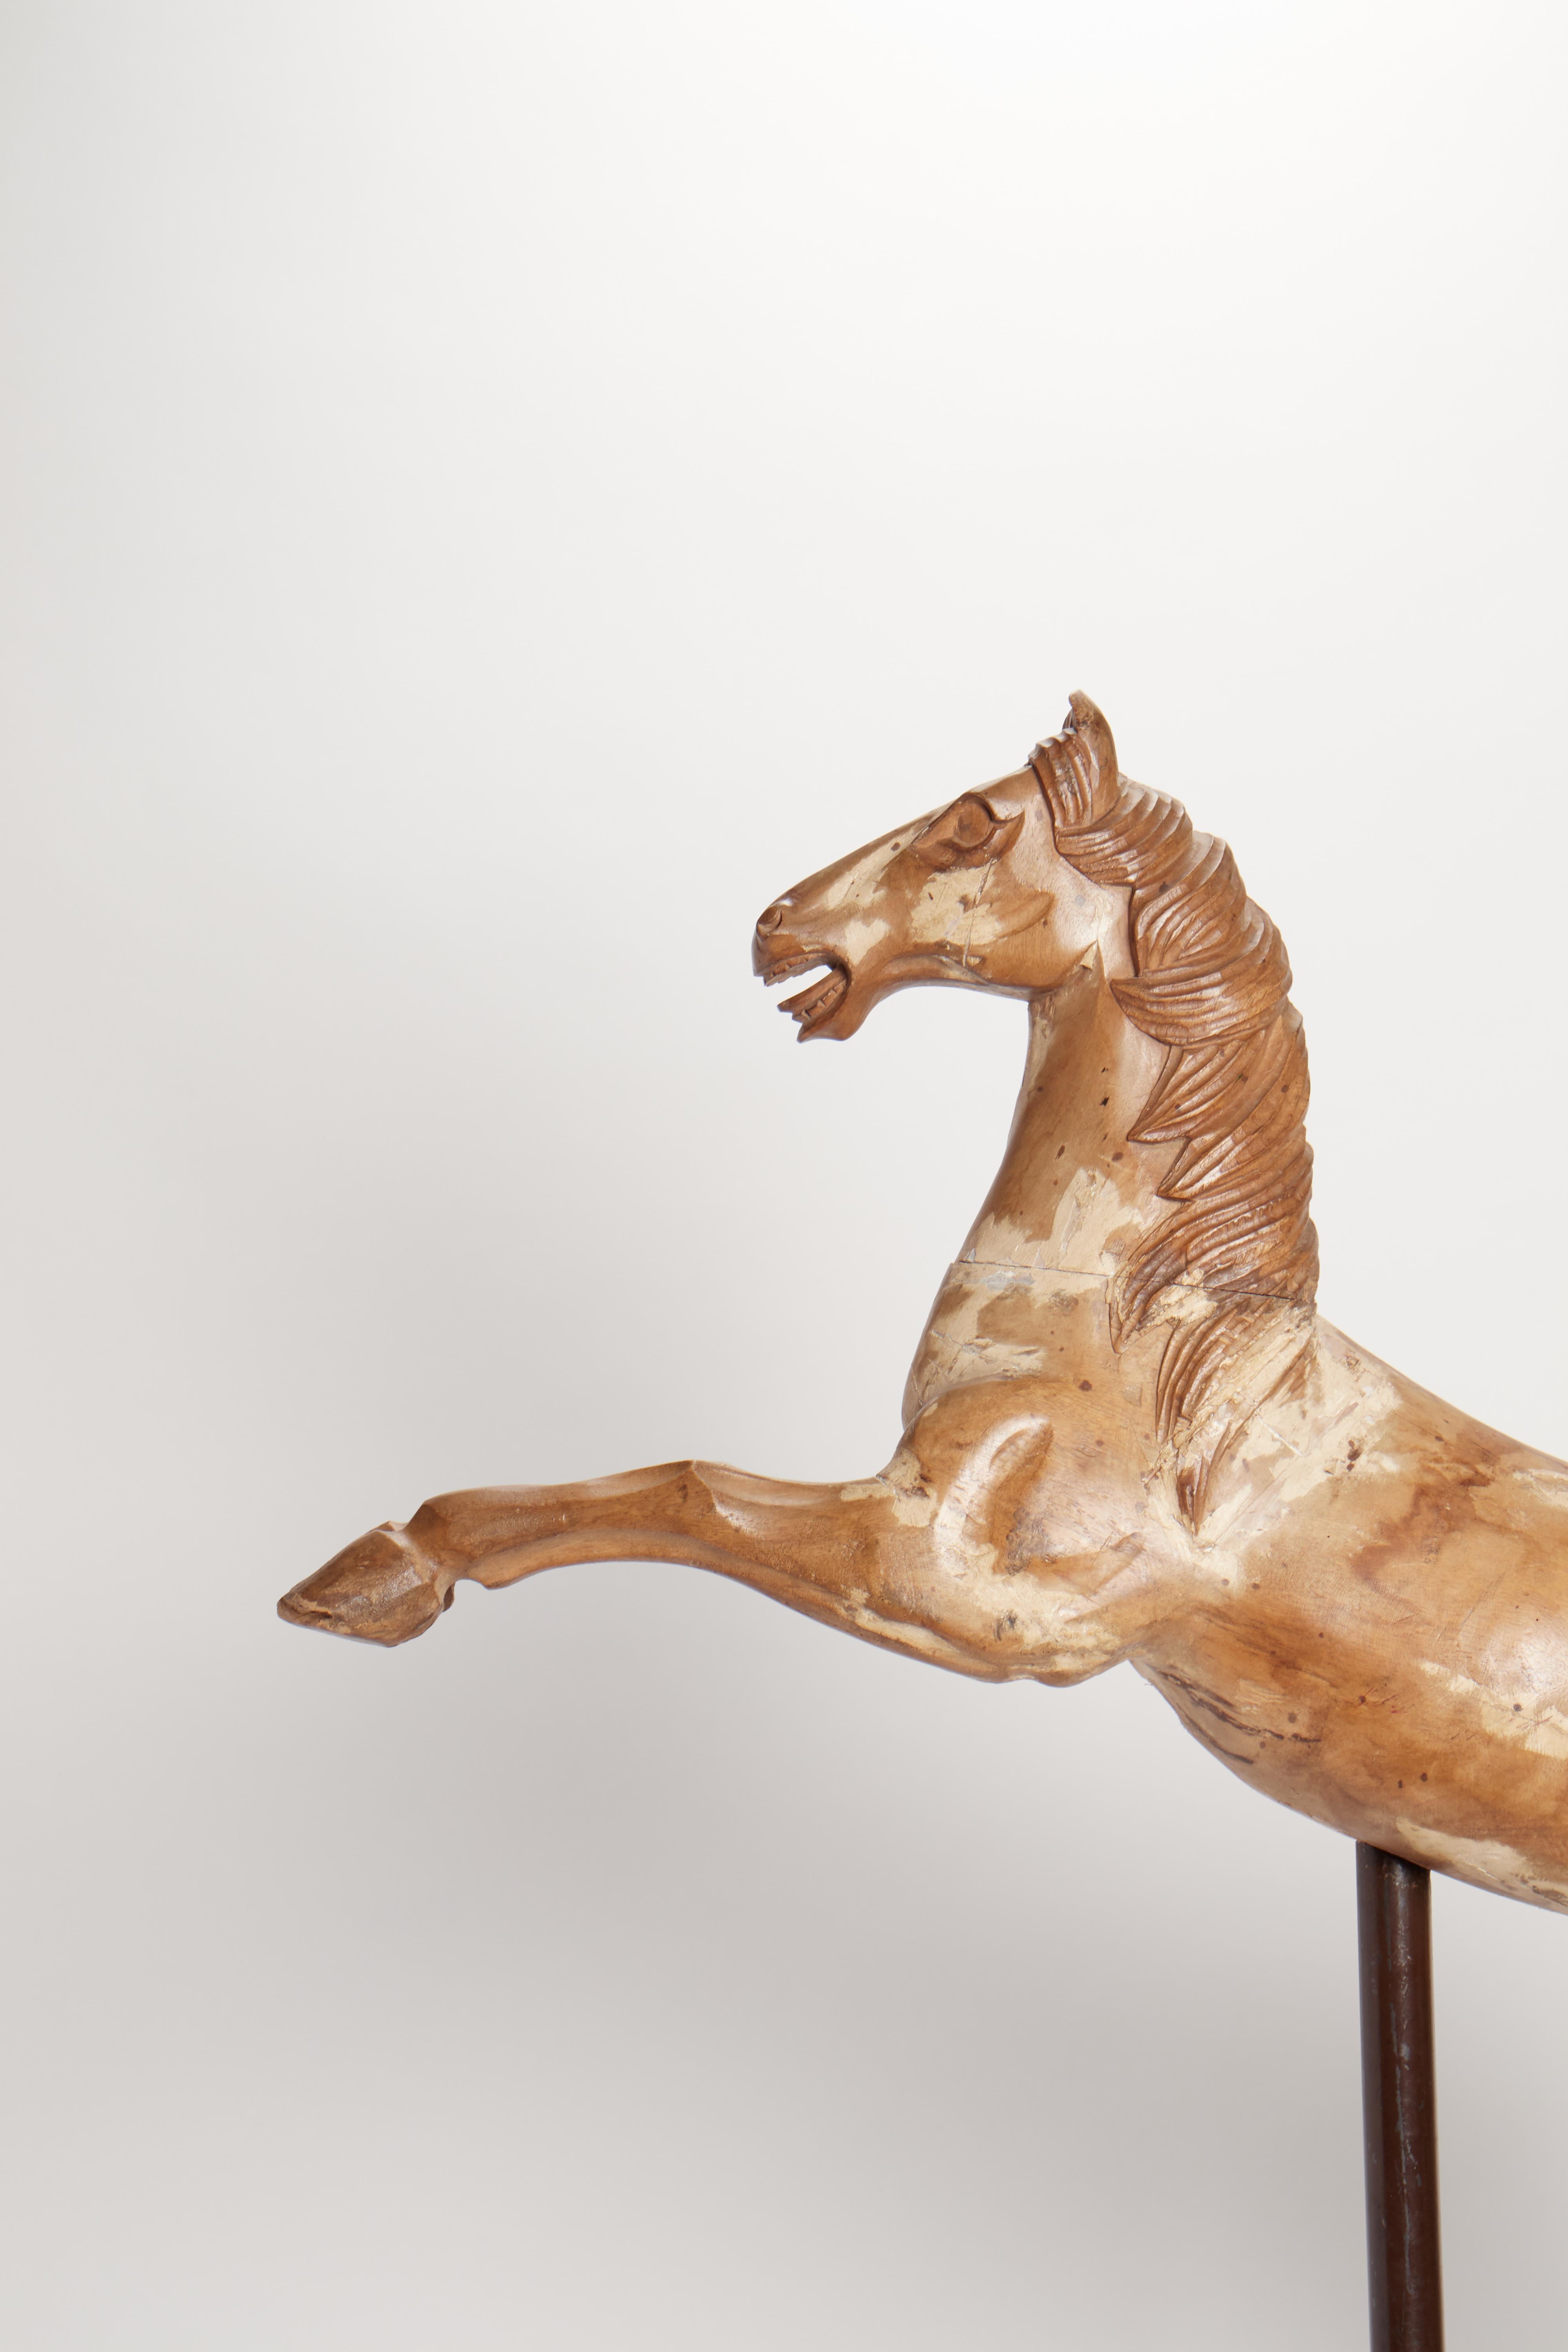 An Italian wooden sculpture of a rampant carrousel horse. Modern metal base. Measure refers to the horse only. Italy, circa 1750.